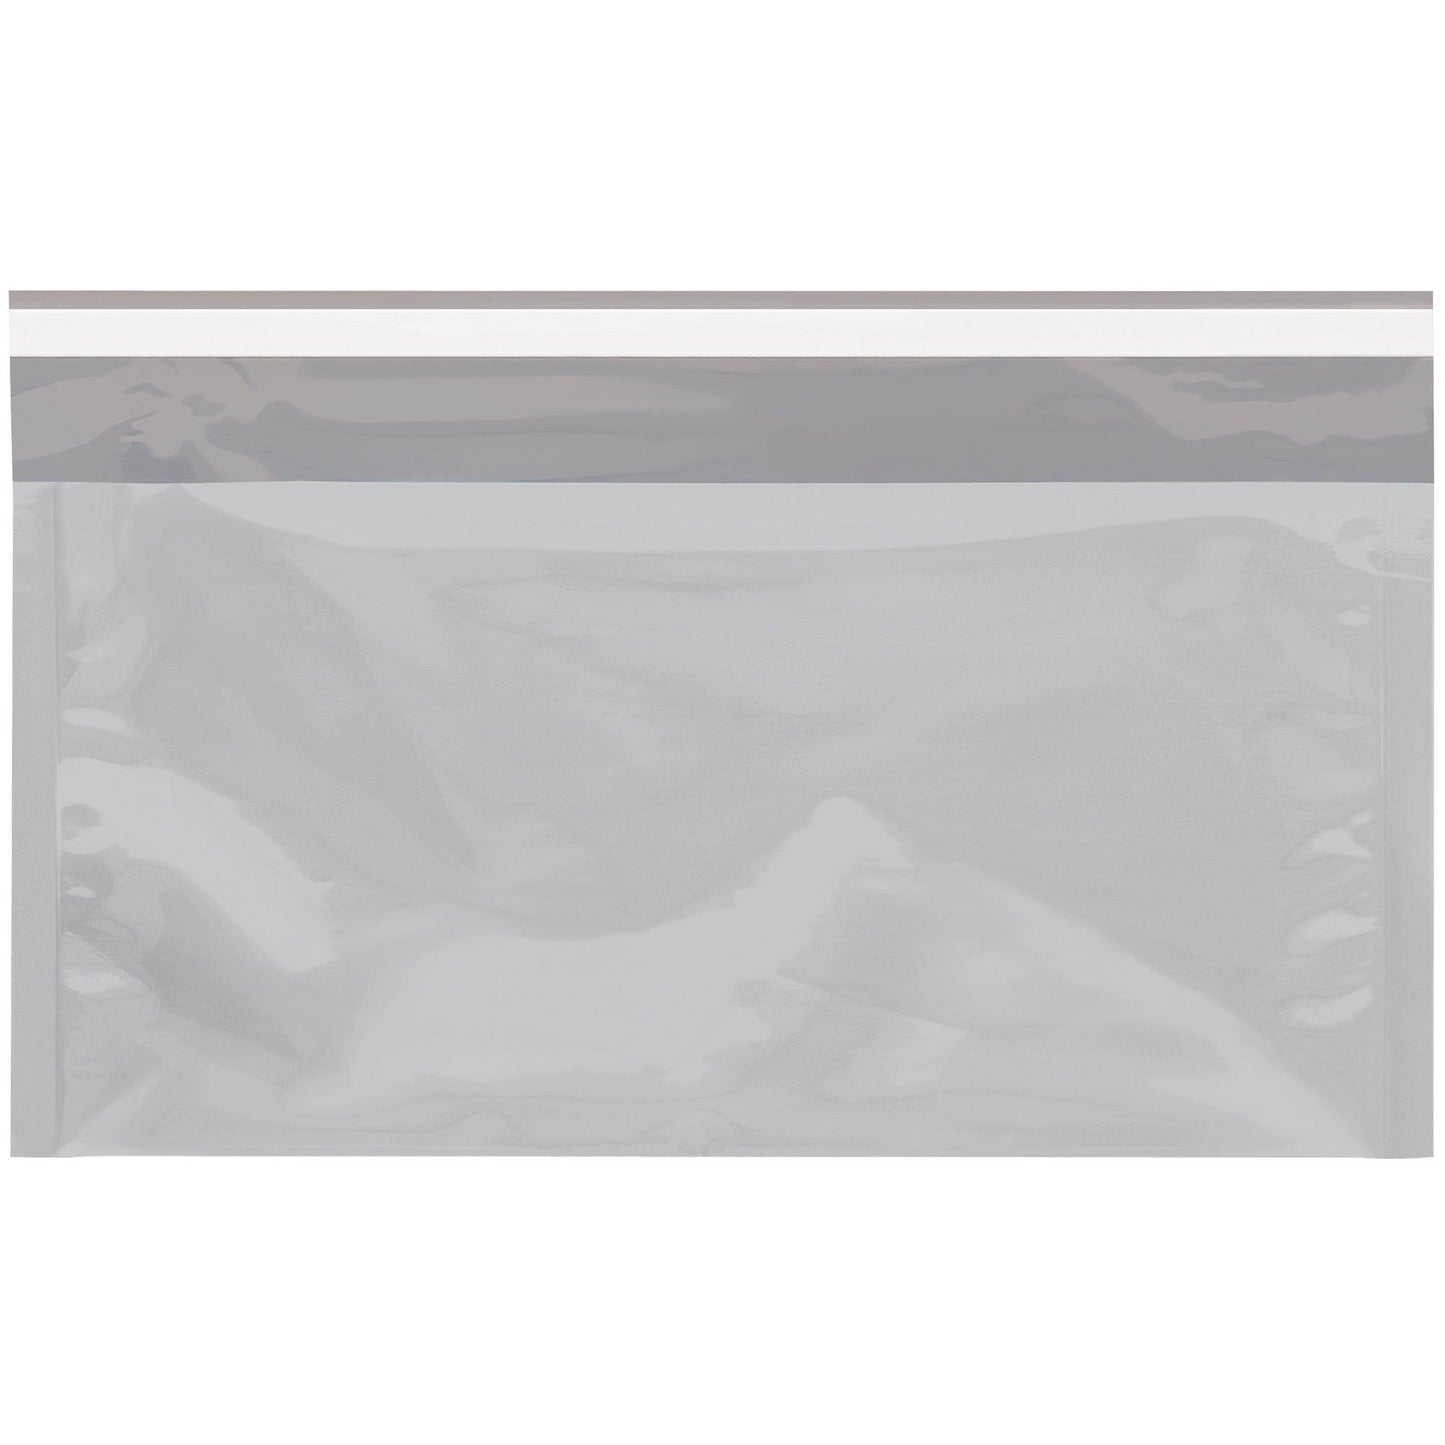 6 1/4 x 10 1/4" Silver Metallic Glamour Mailers - GFM0610S